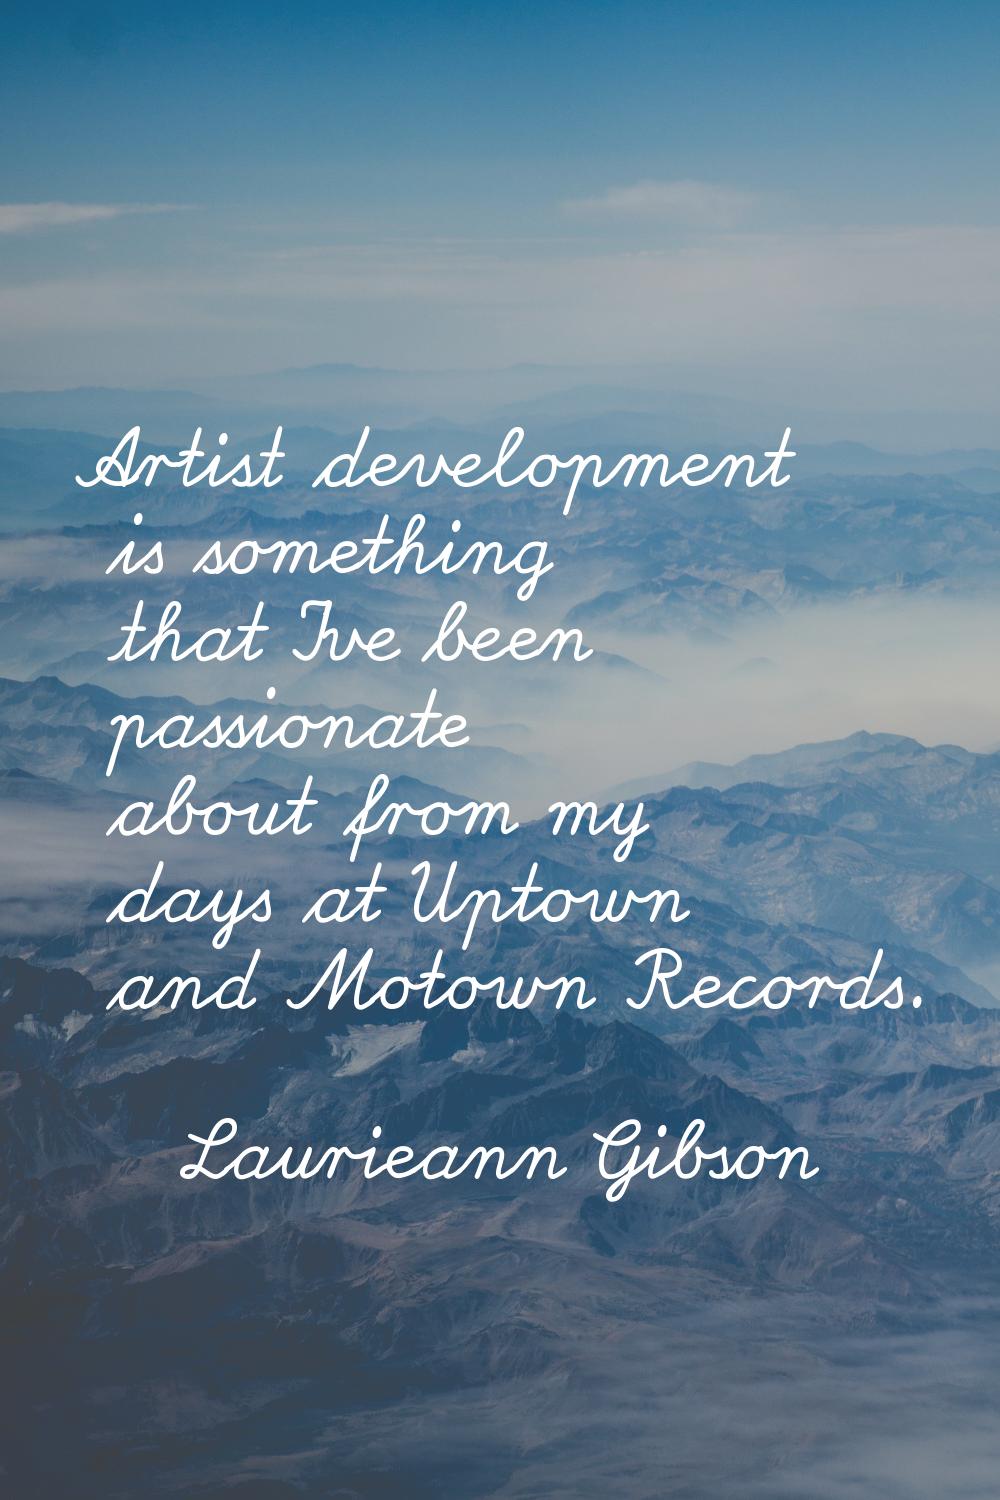 Artist development is something that I've been passionate about from my days at Uptown and Motown R